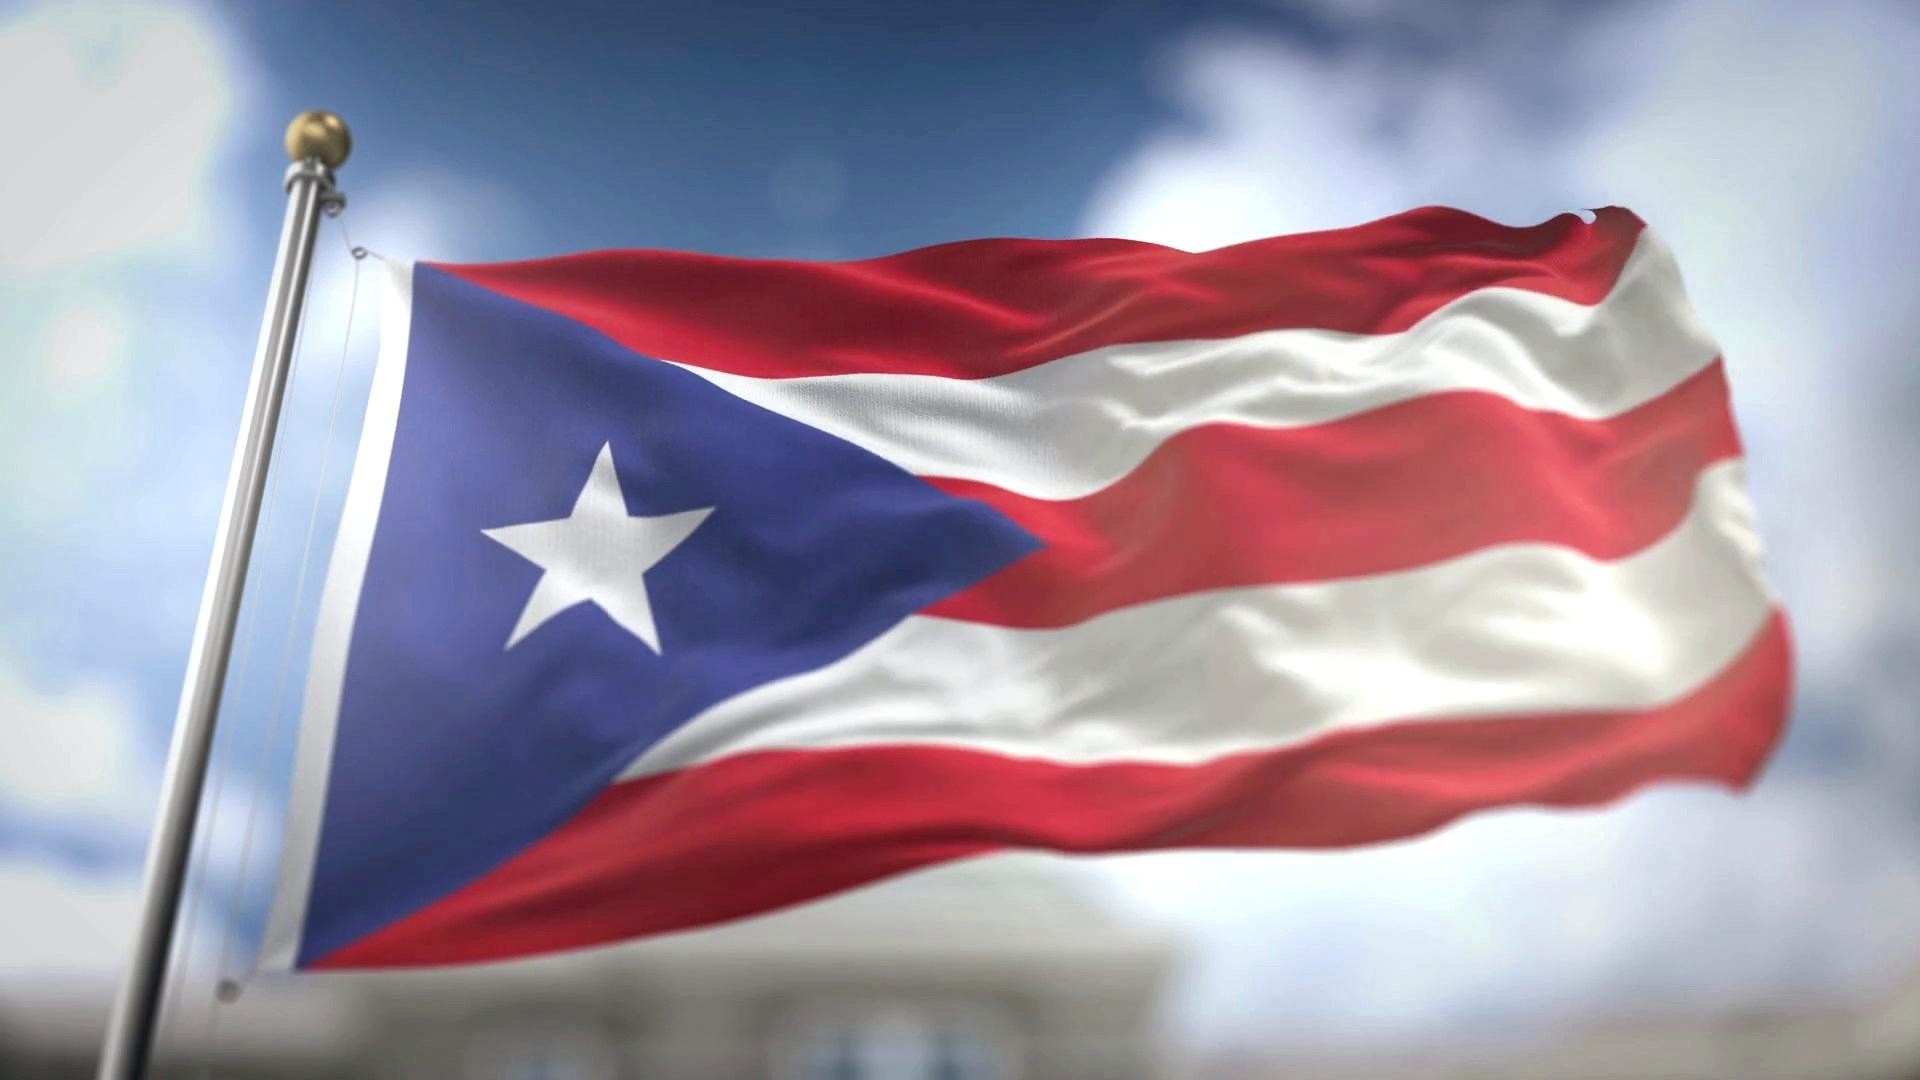 1920x1080 puerto rico flag tattoo on hand rican live wallpaper sculpture chicago  heritage month symbols .